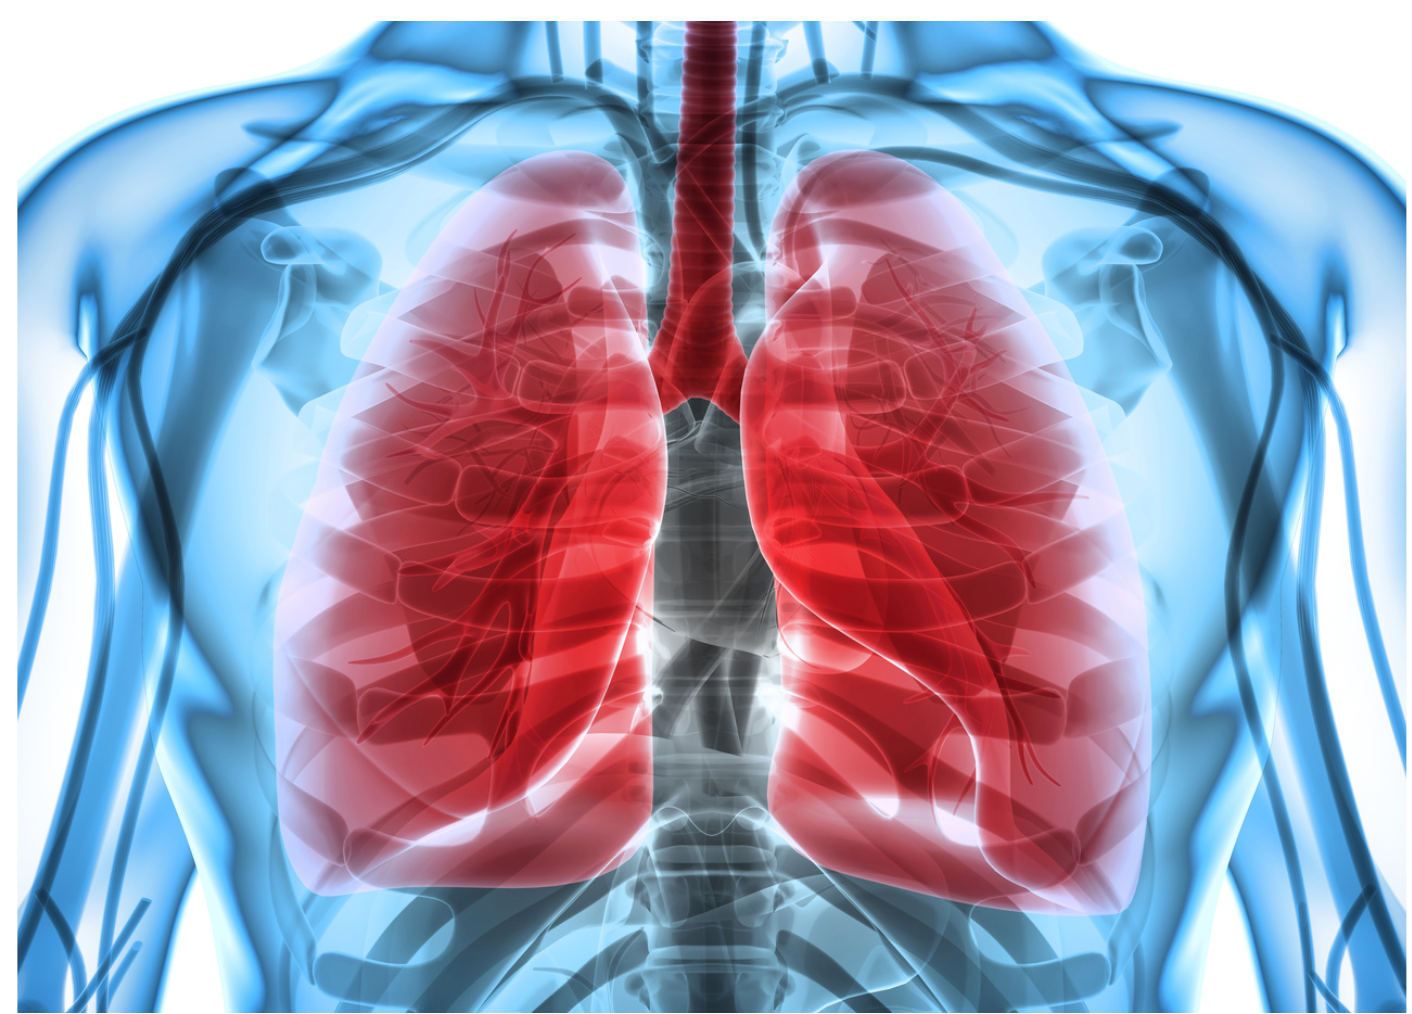 Bacteria May Cause Anti-Immunotherapy Activity in Patients With Lung Cancer